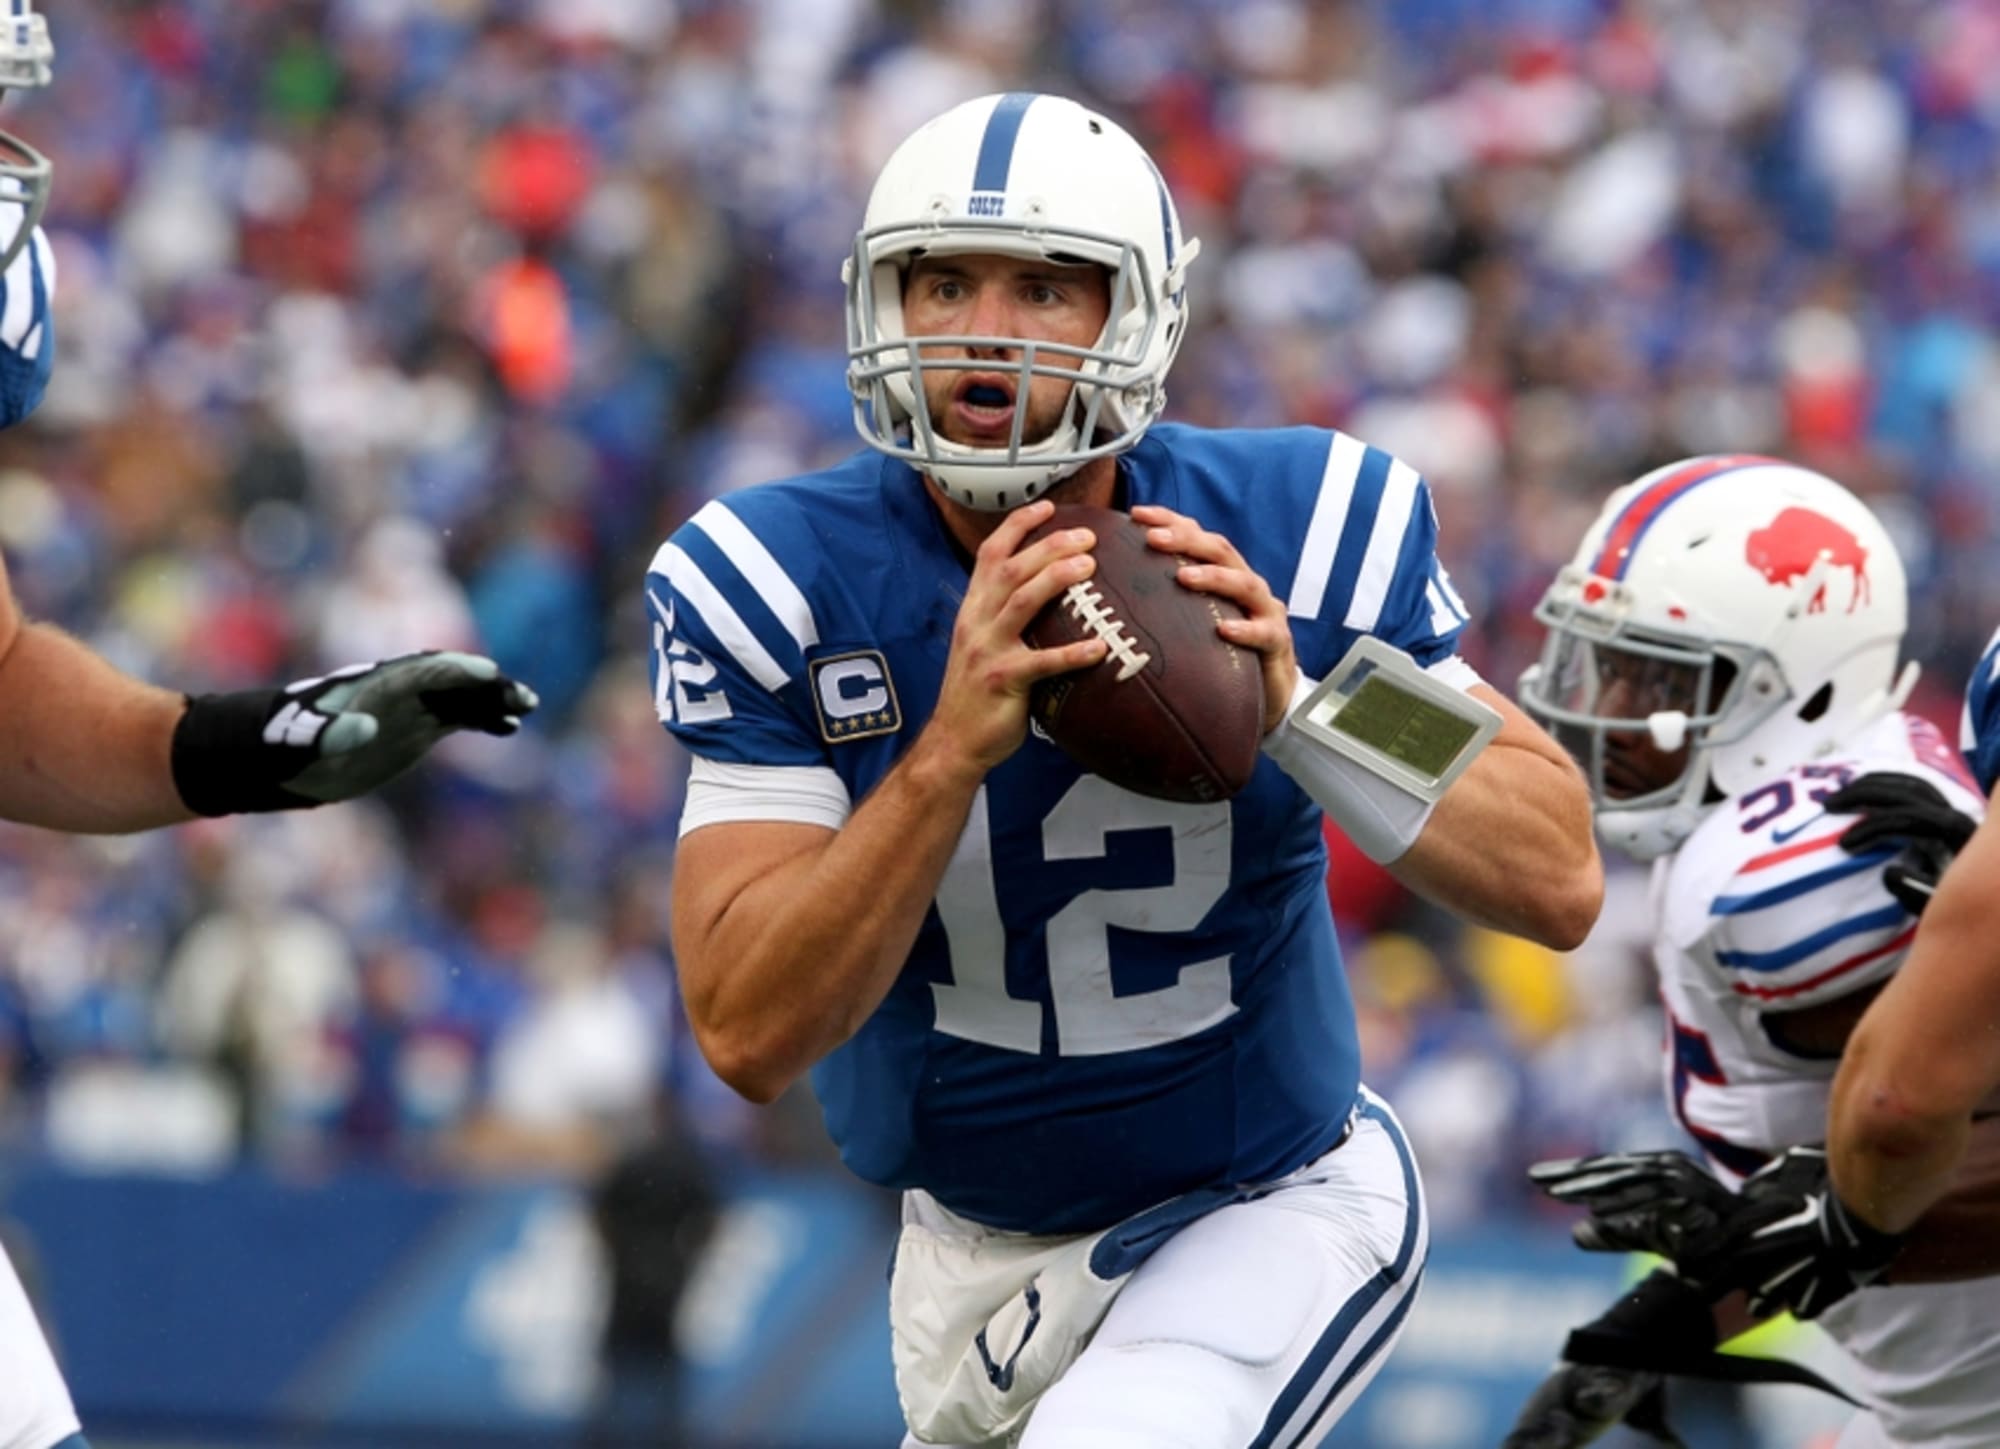 Indianapolis Colts: Andrew Luck Signs New, Lucrative Contract